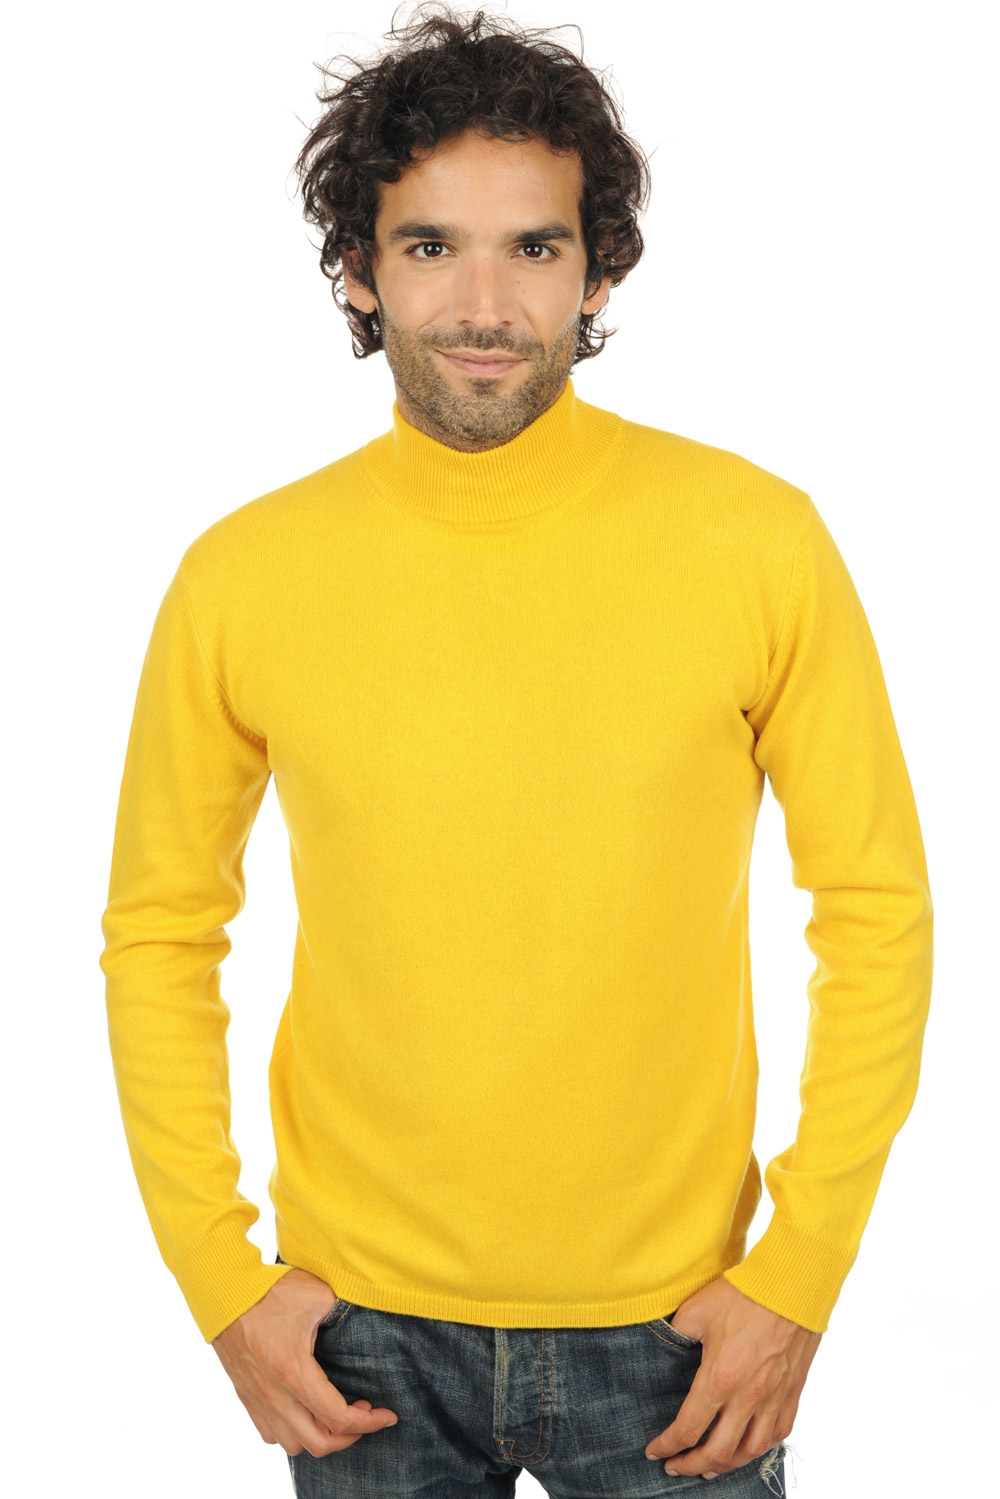 Cashmere men frederic cyber yellow 2xl